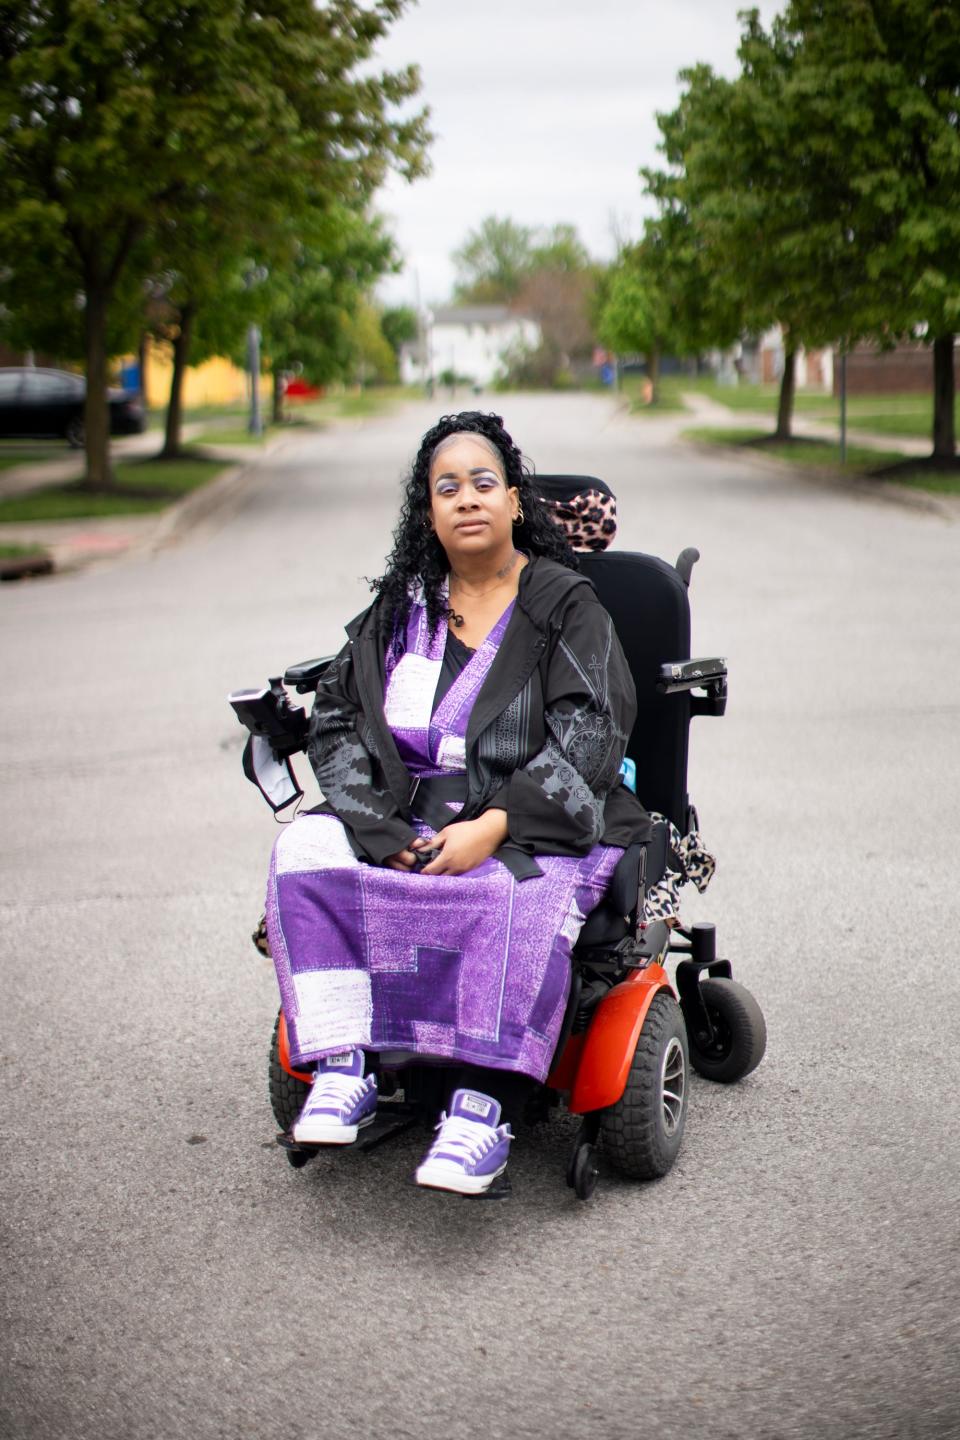 Shelisa Nicole Williams, who lives in South Linden, gets around her neighborhood via wheelchair. That can be difficult given there are gaps in sidewalks and areas without sidewalks at all. Often, it means she must use the street instead of sidewalks and she said she has nearly been hit on several occasions.